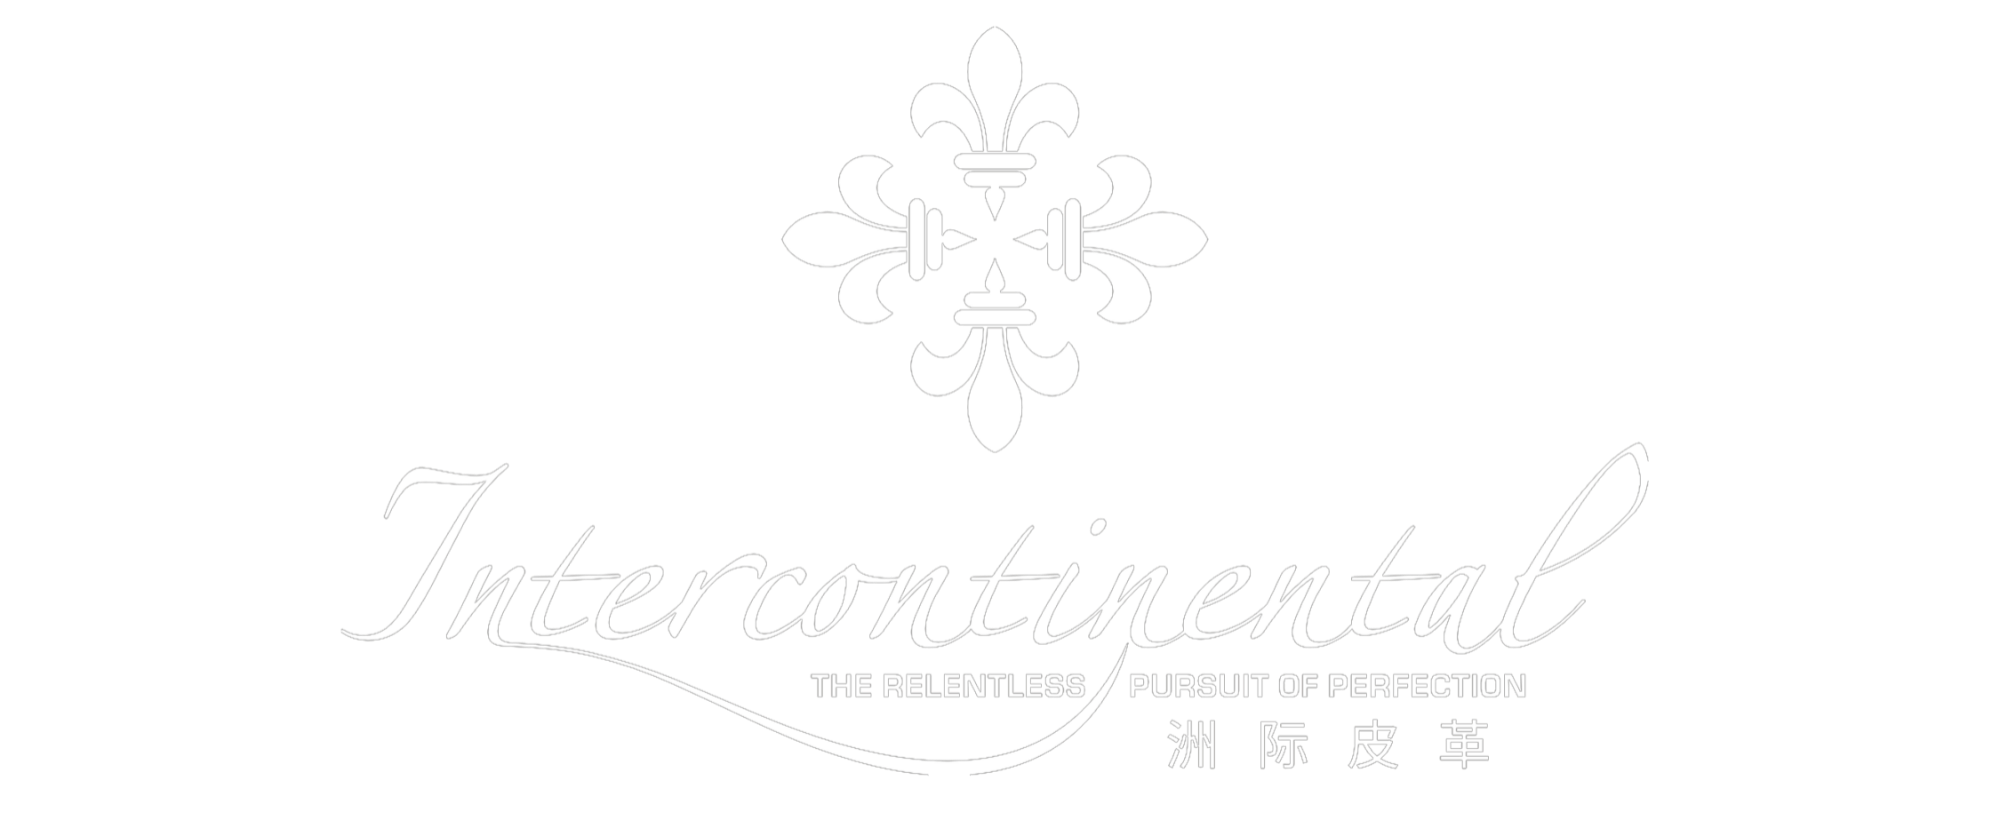 Guangdong Intercontinental Leather Company Limited